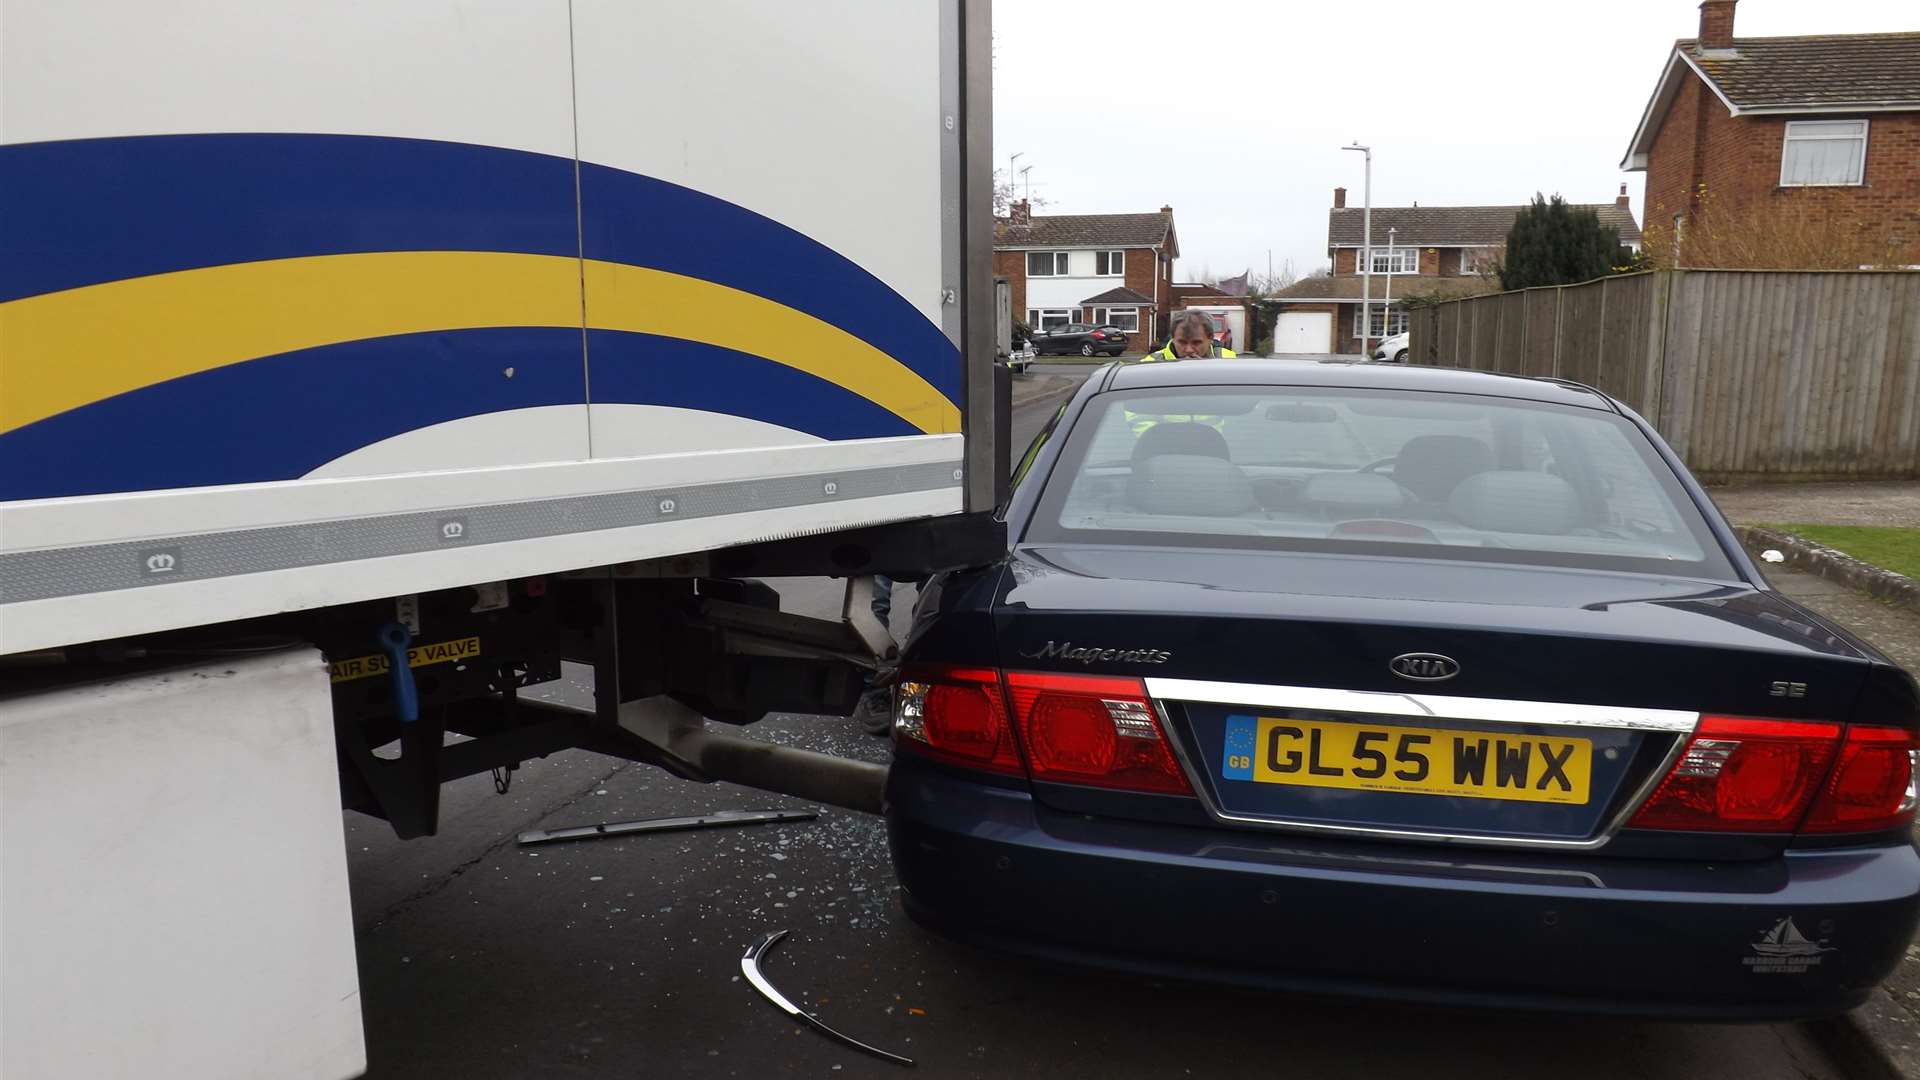 Lorries have been writing off cars, bending lampposts and damaging signs.